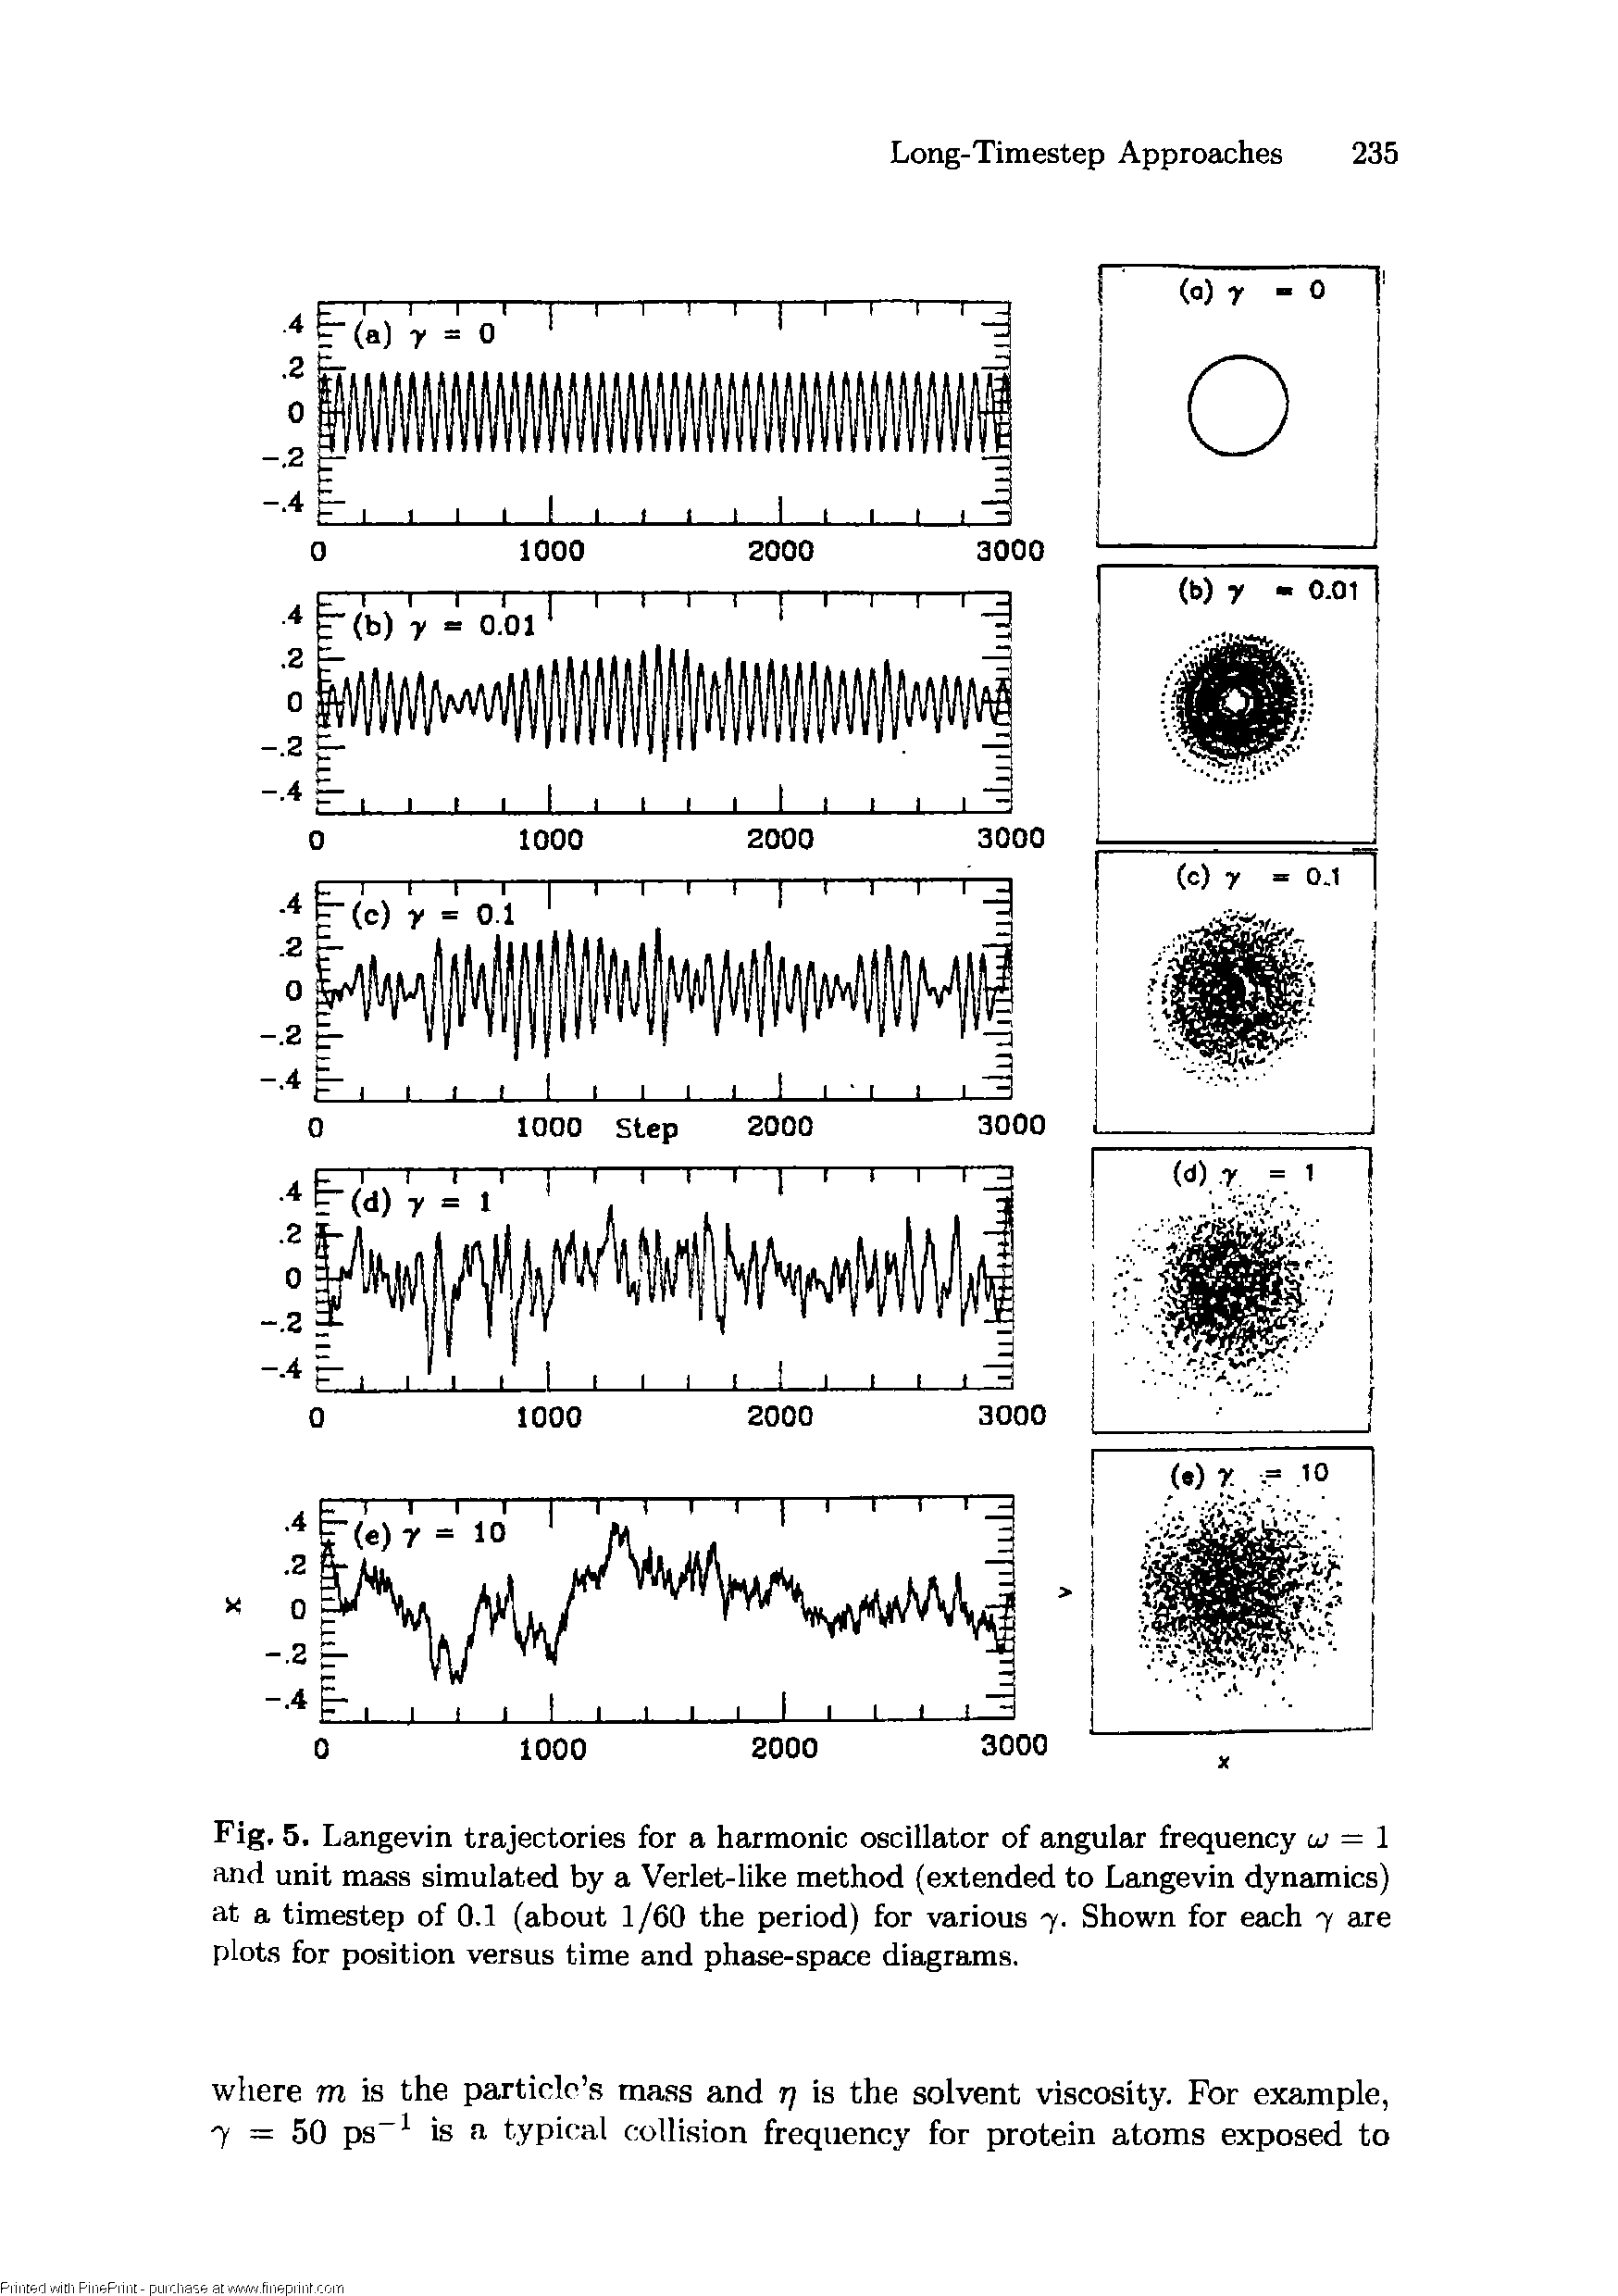 Fig. 5. Langevin trajectories for a harmonic oscillator of angular frequency u = 1 and unit mass simulated by a Verlet-like method (extended to Langevin dynamics) at a timestep of 0.1 (about 1/60 the period) for various 7. Shown for each 7 are plots for position versus time and phase-space diagrams.